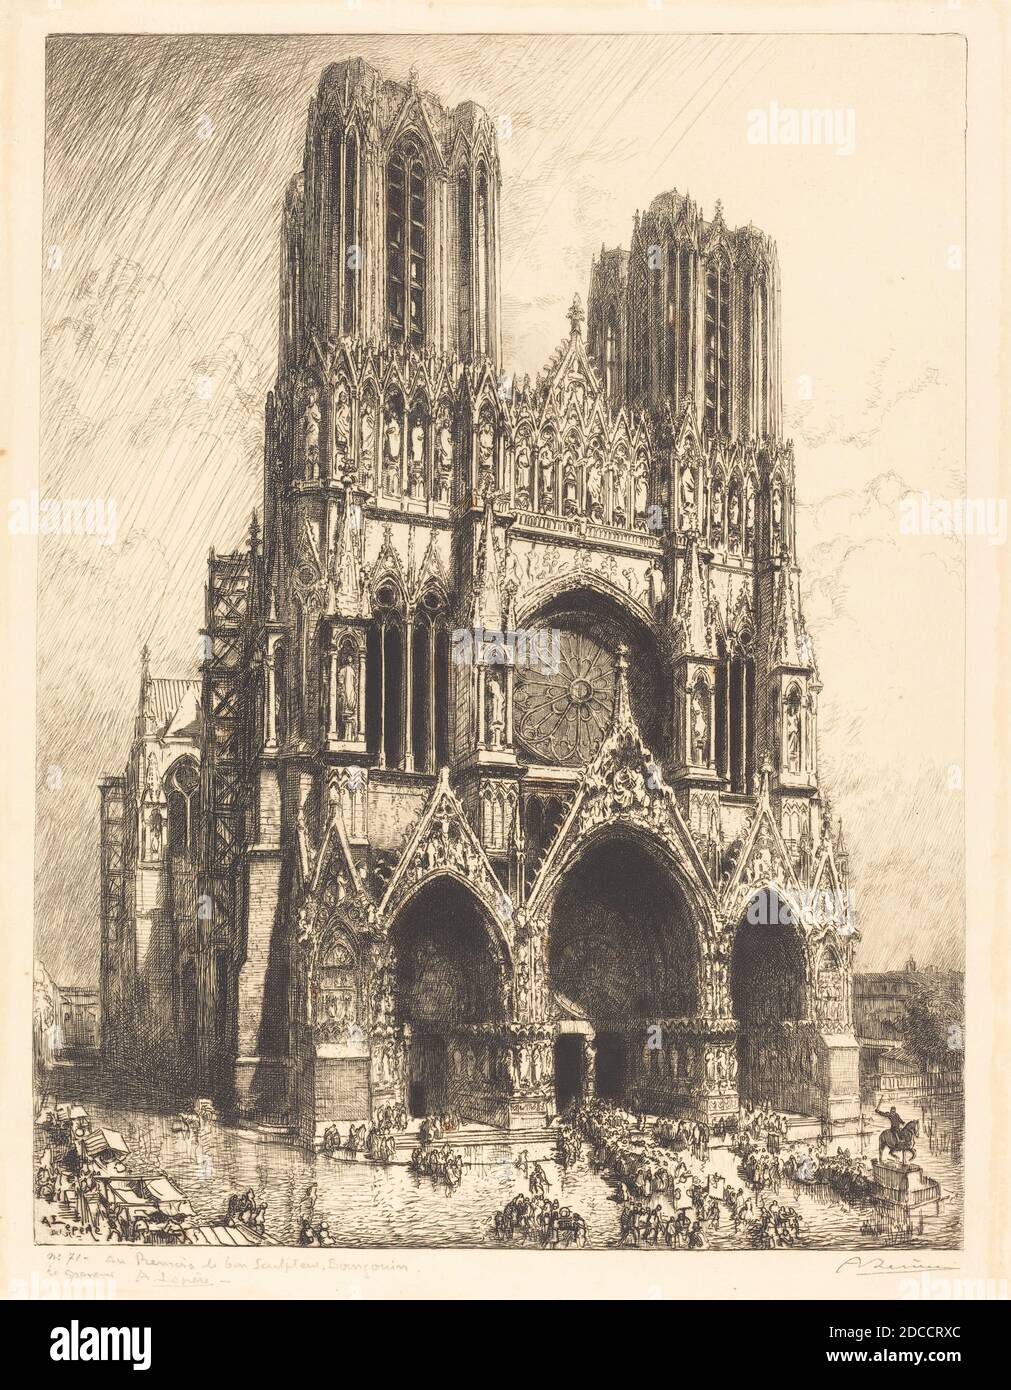 Auguste Lepère, (artist), French, 1849 - 1918, Reims Cathedral (Cathedrale de Reims), 1911, etching Stock Photo